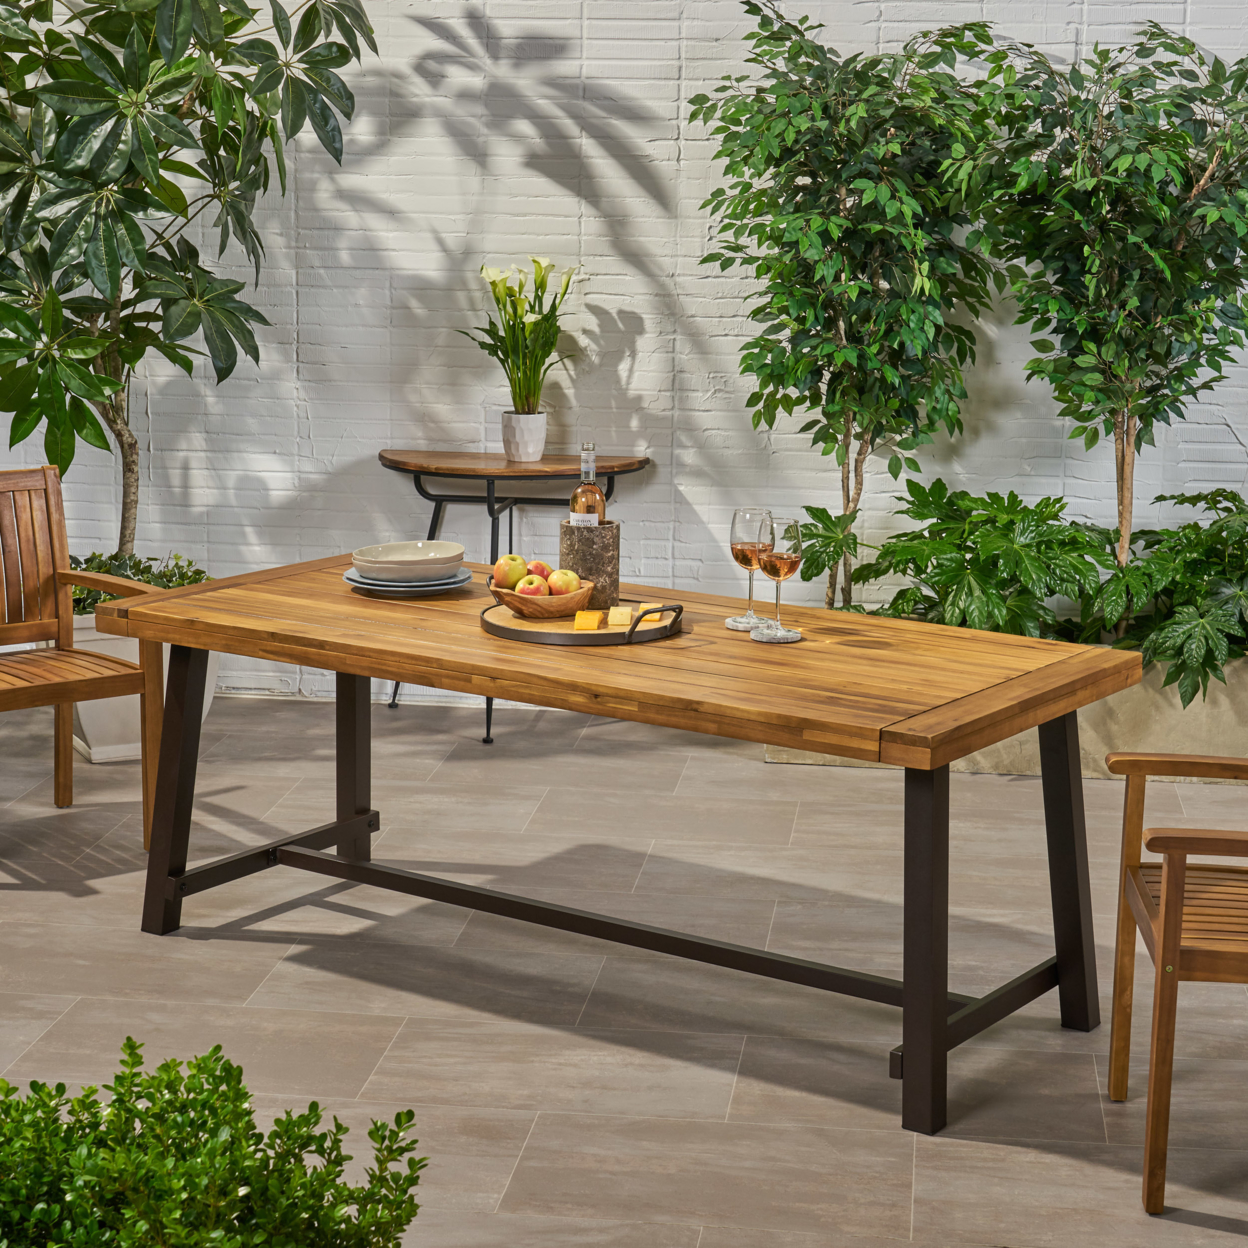 Beau Outdoor Eight Seater Wooden Dining Table - Teak Finish + Rustic Metal Finish